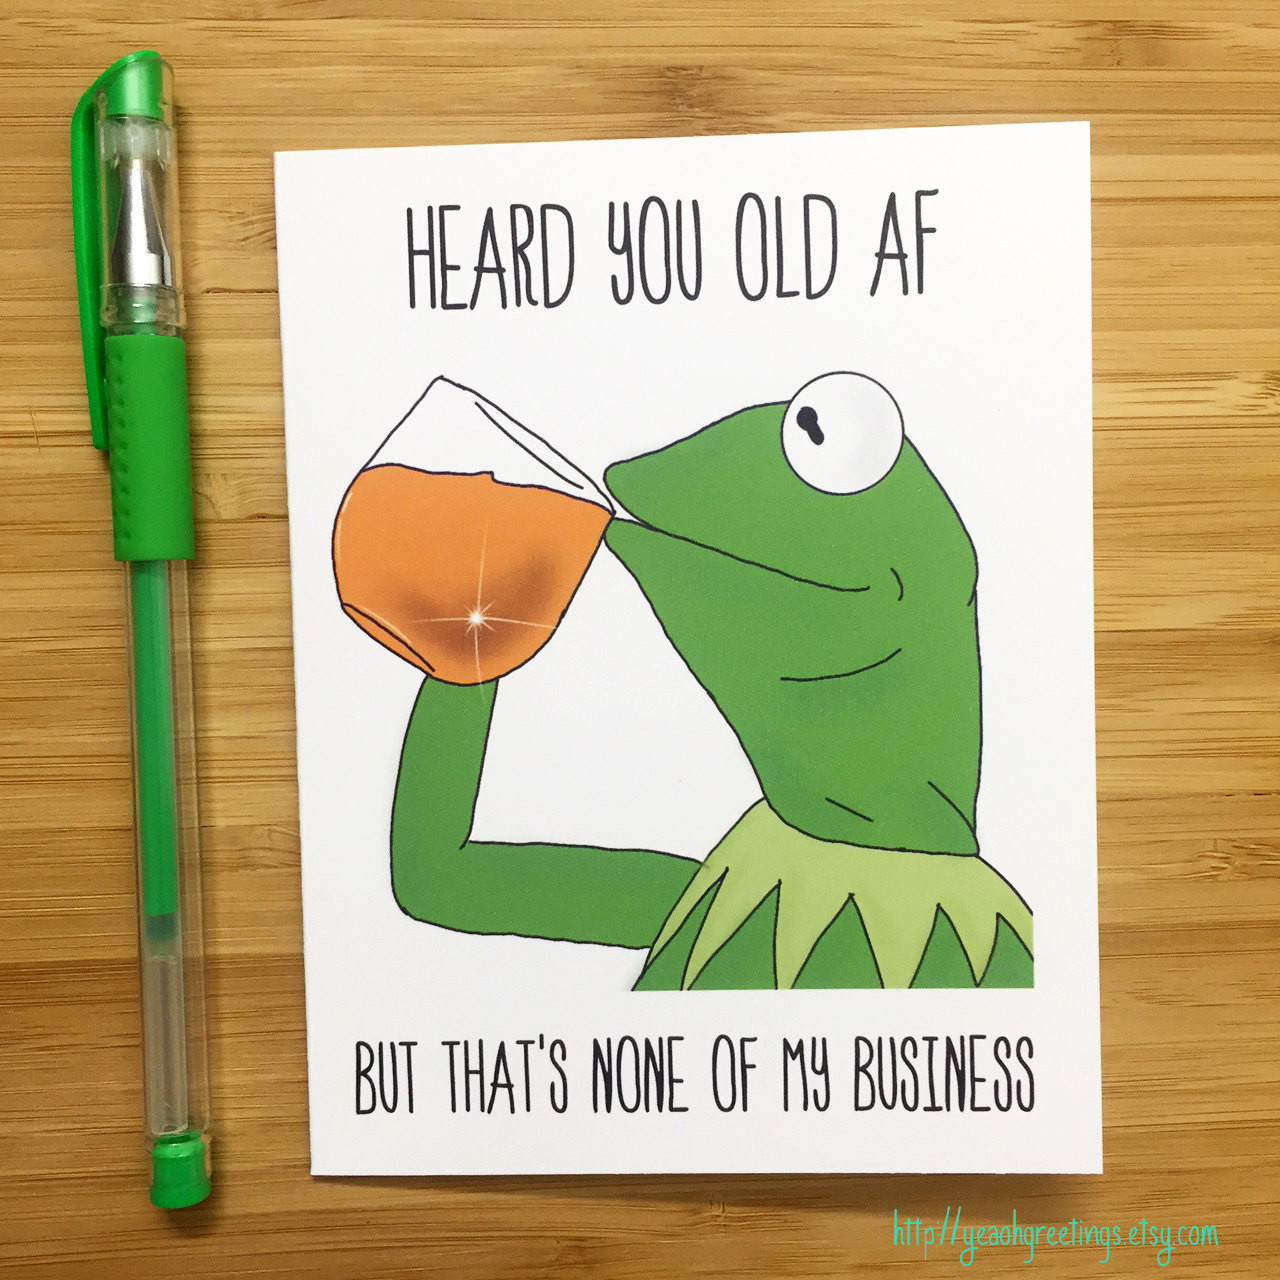 Funny Birthday Card Images
 Funny Birthday Cards We Need Fun